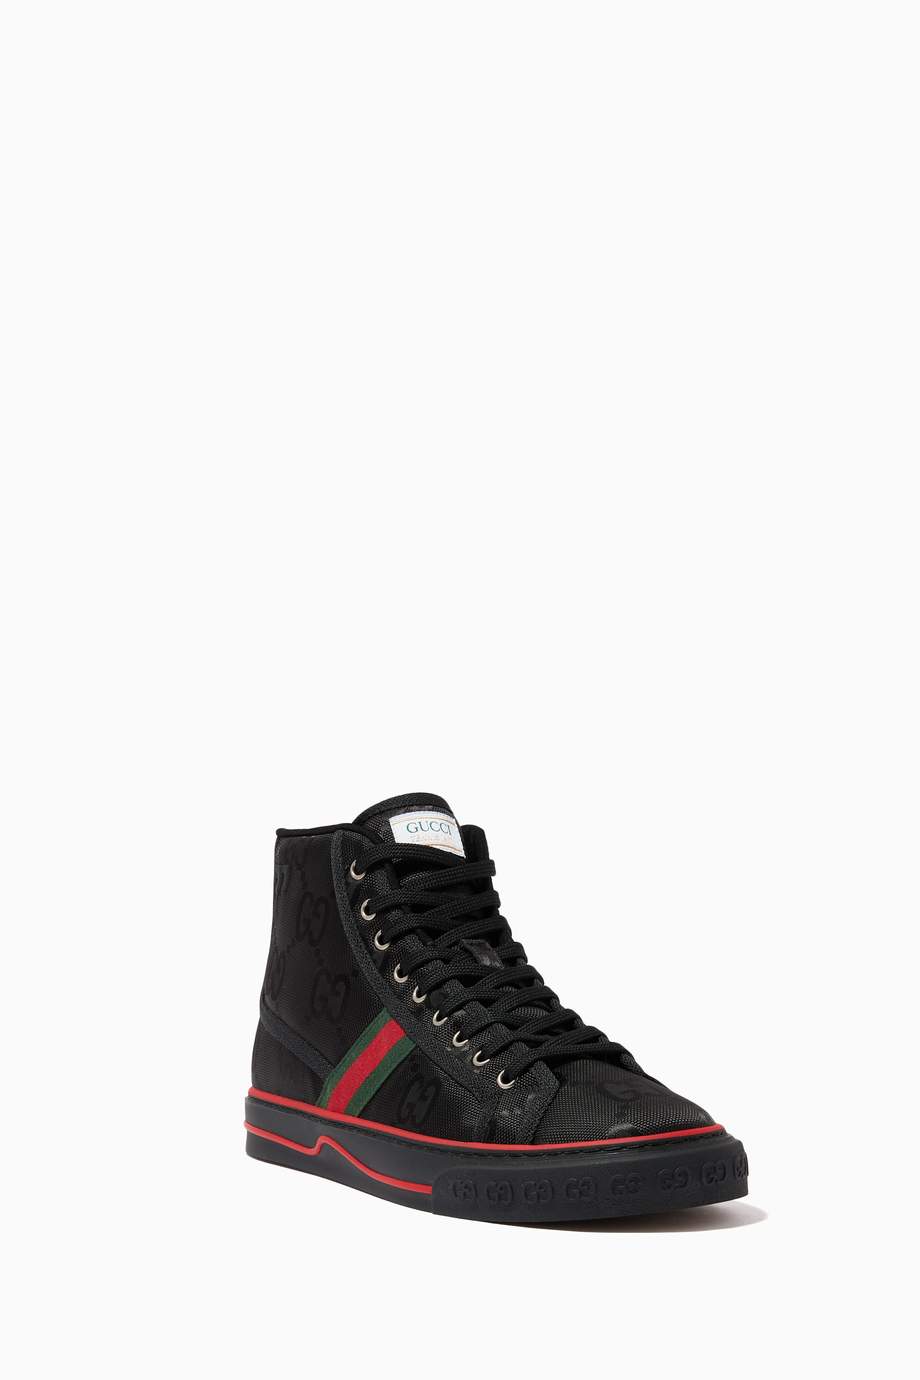 Shop Gucci Black Off The Grid High Top Sneakers in GG Nylon for Men ...